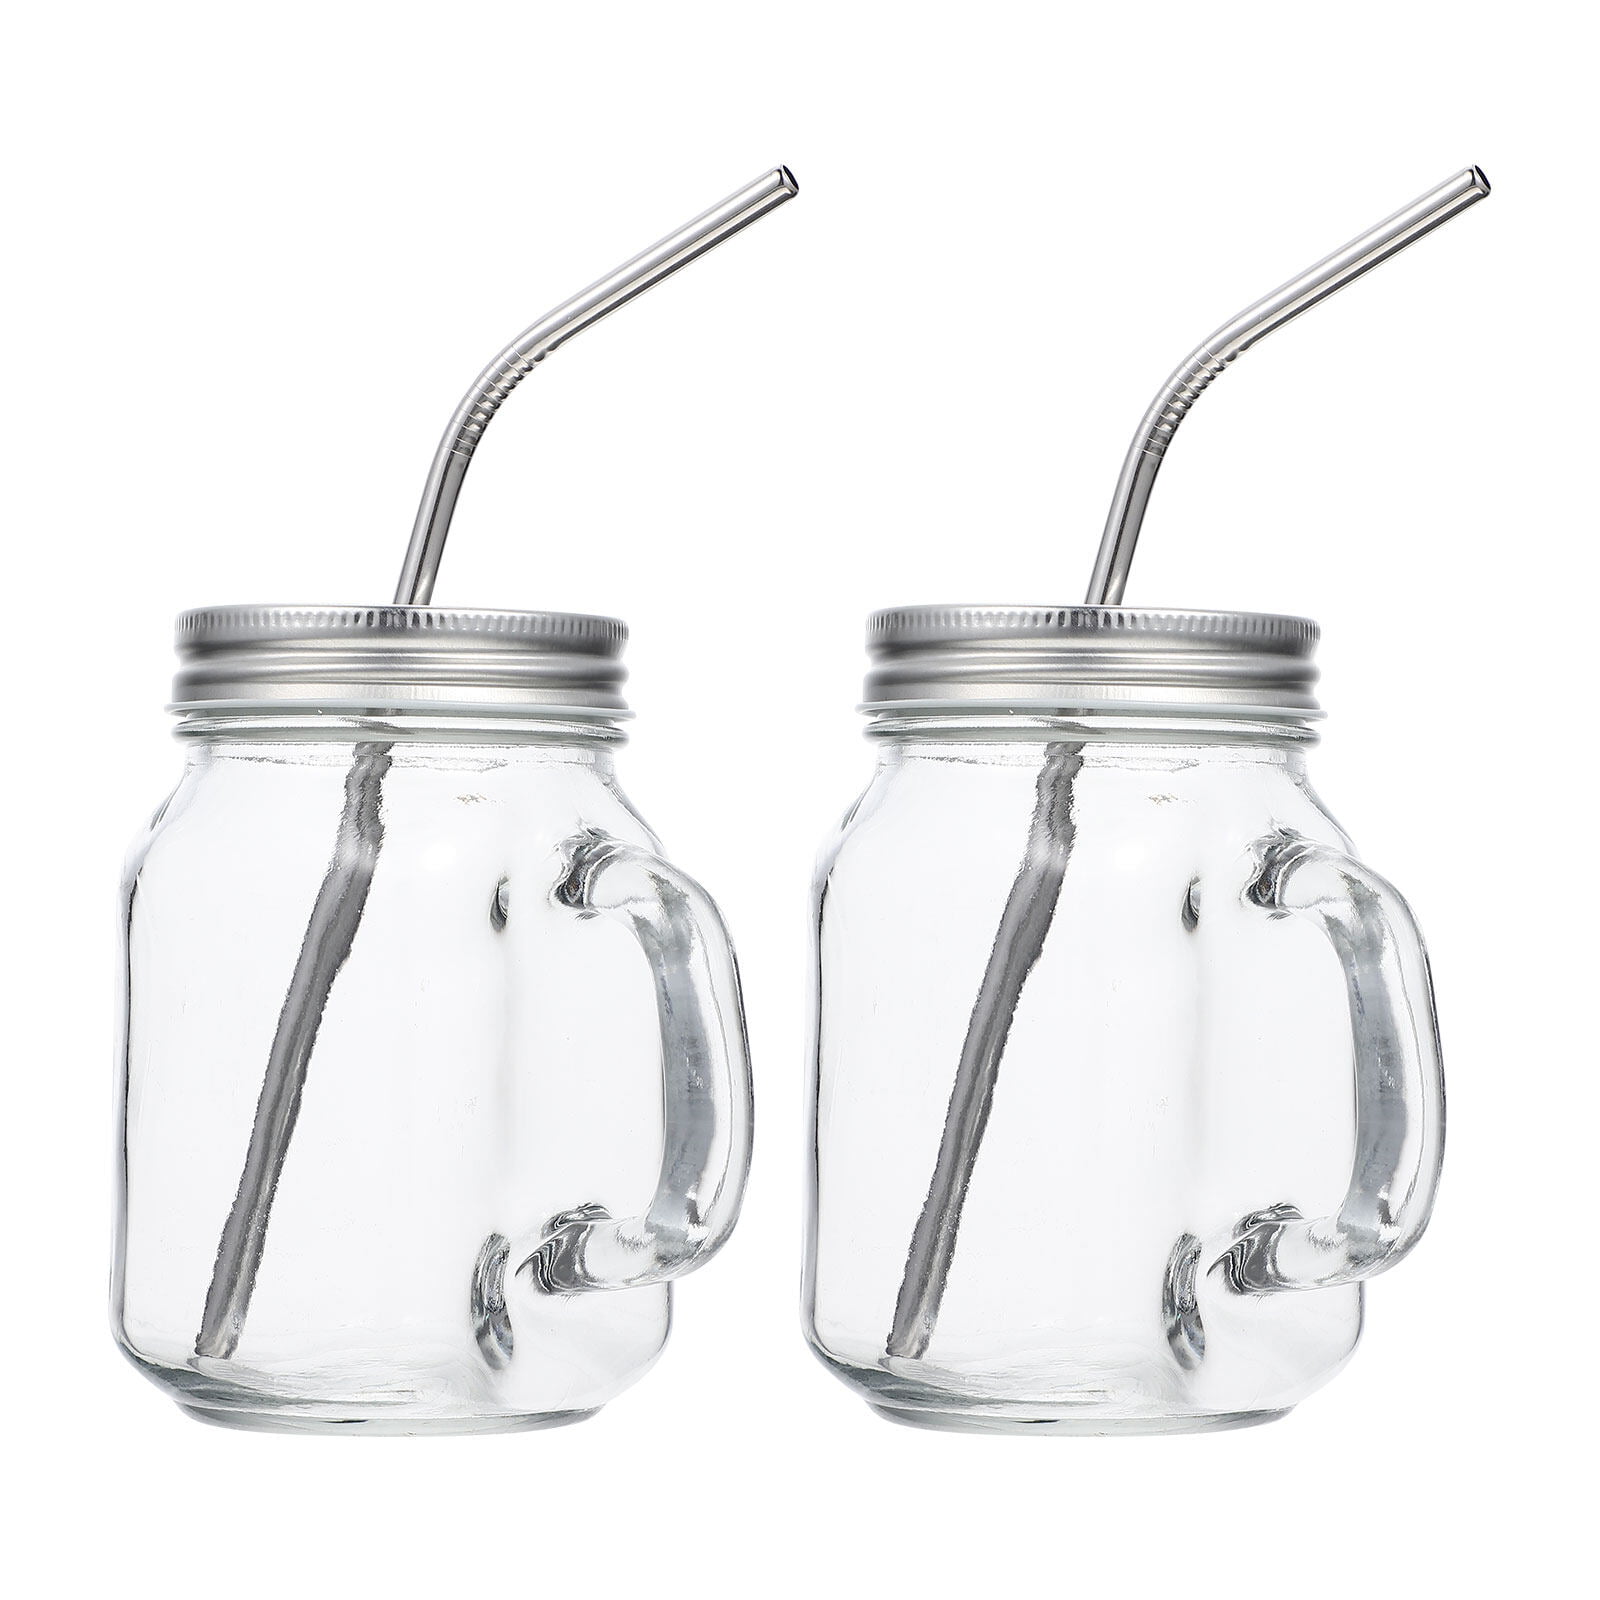 YSJILIDE Smoothie Cups, Glass Mason Drinking Jar, 24oz Smoothie Cups with  Lid and Stainless Steel St…See more YSJILIDE Smoothie Cups, Glass Mason